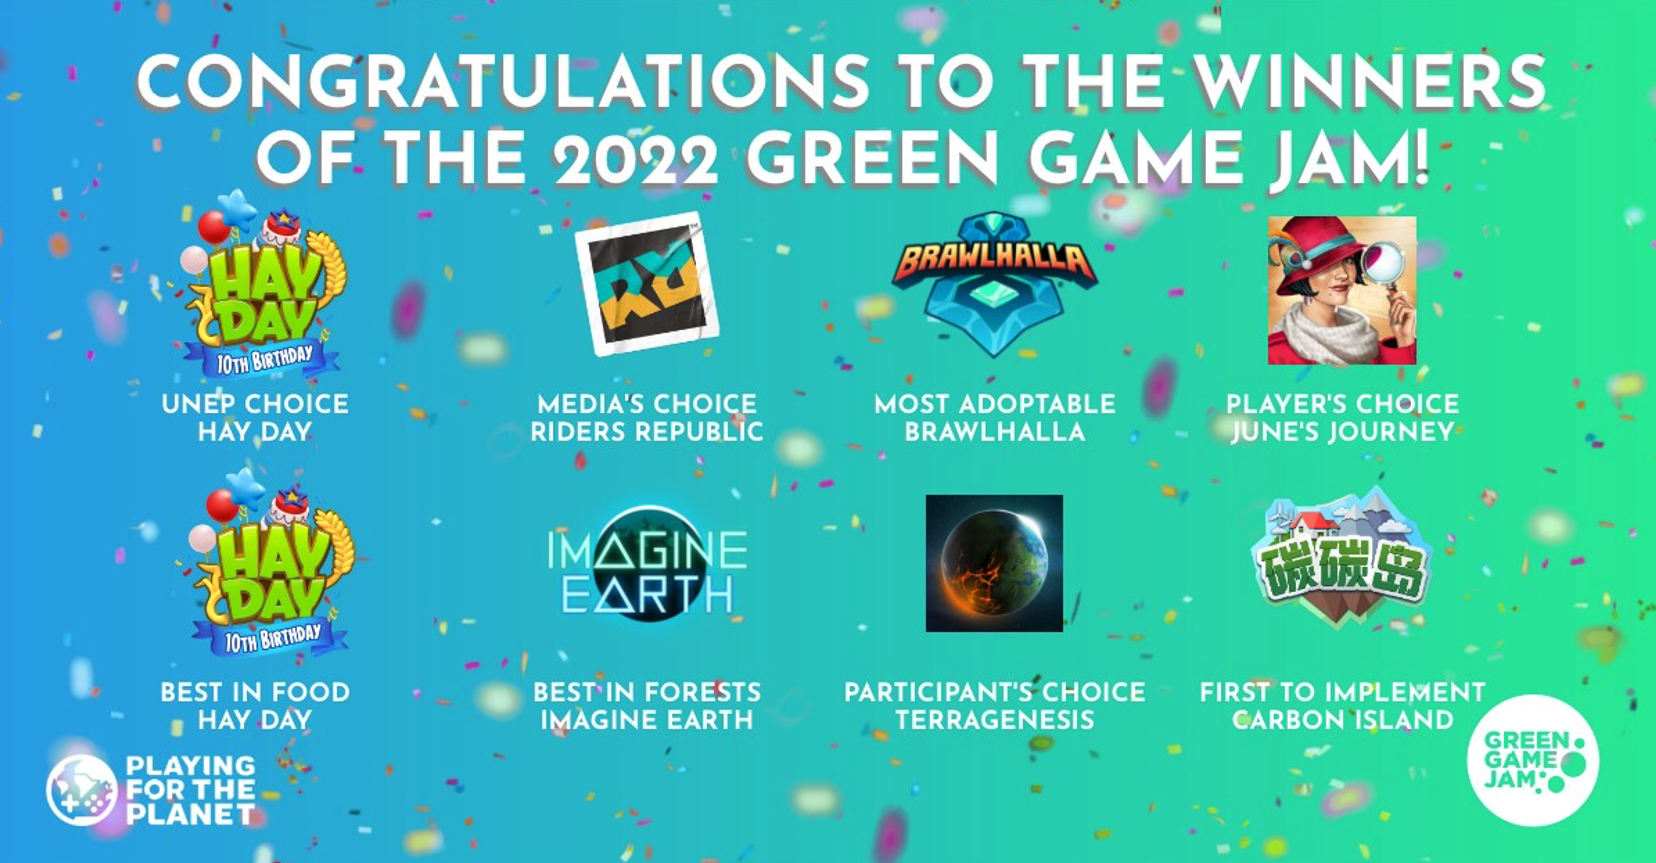 Tencent Games Wins Green Game Jam Award for Second Year in a Row